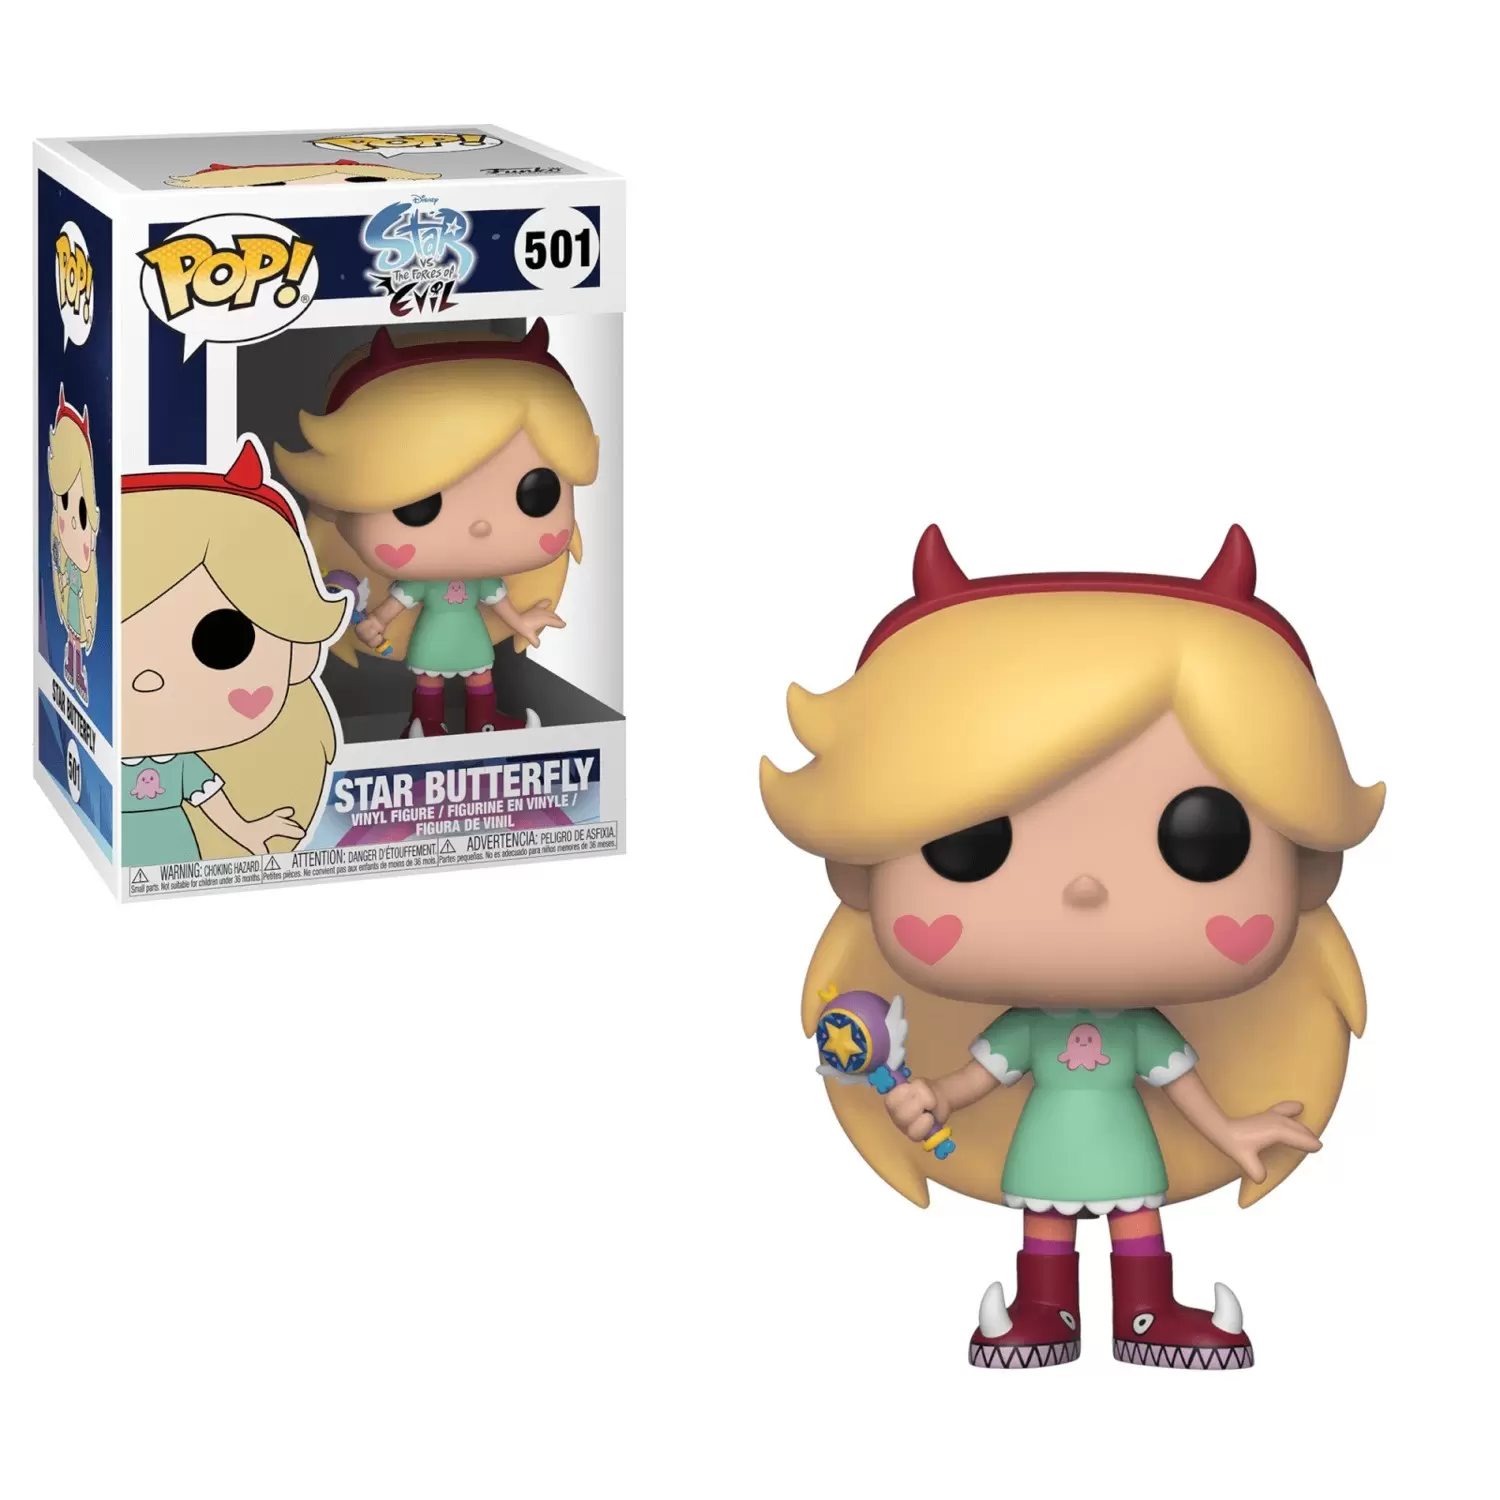 POP! Disney - Star vs. the Forces of Evil - Star Butterfly